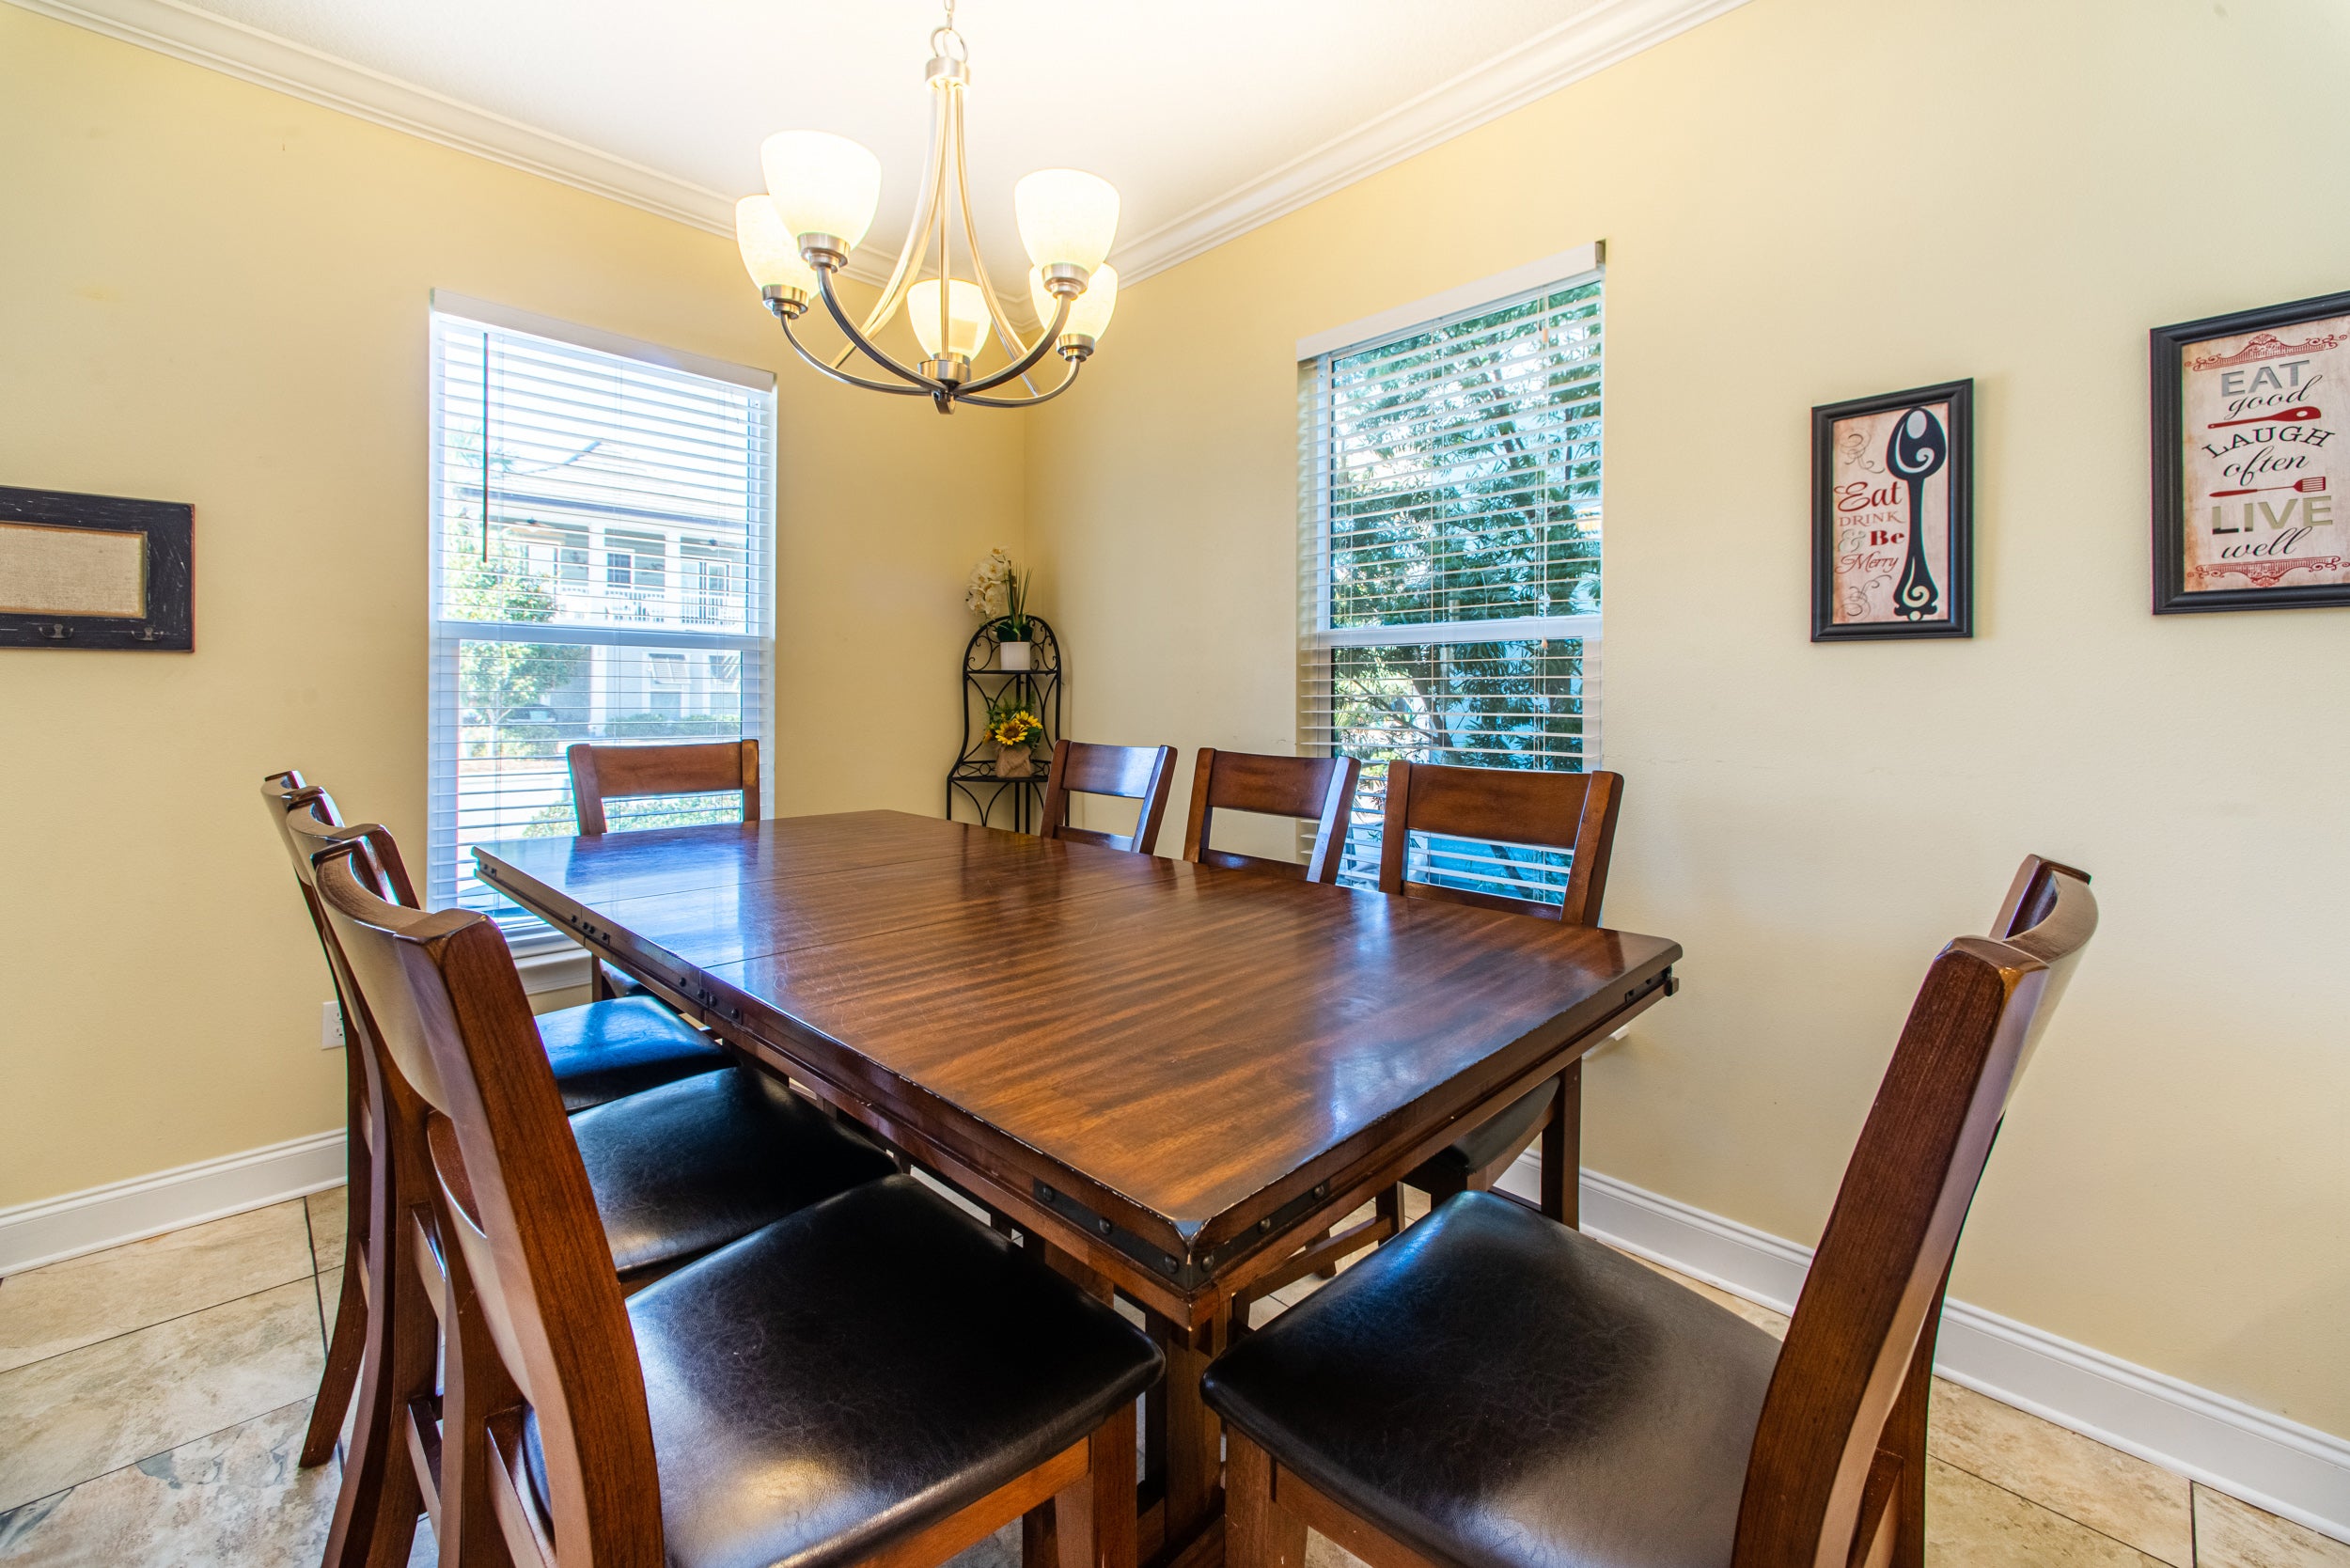 Dining room table seats 8